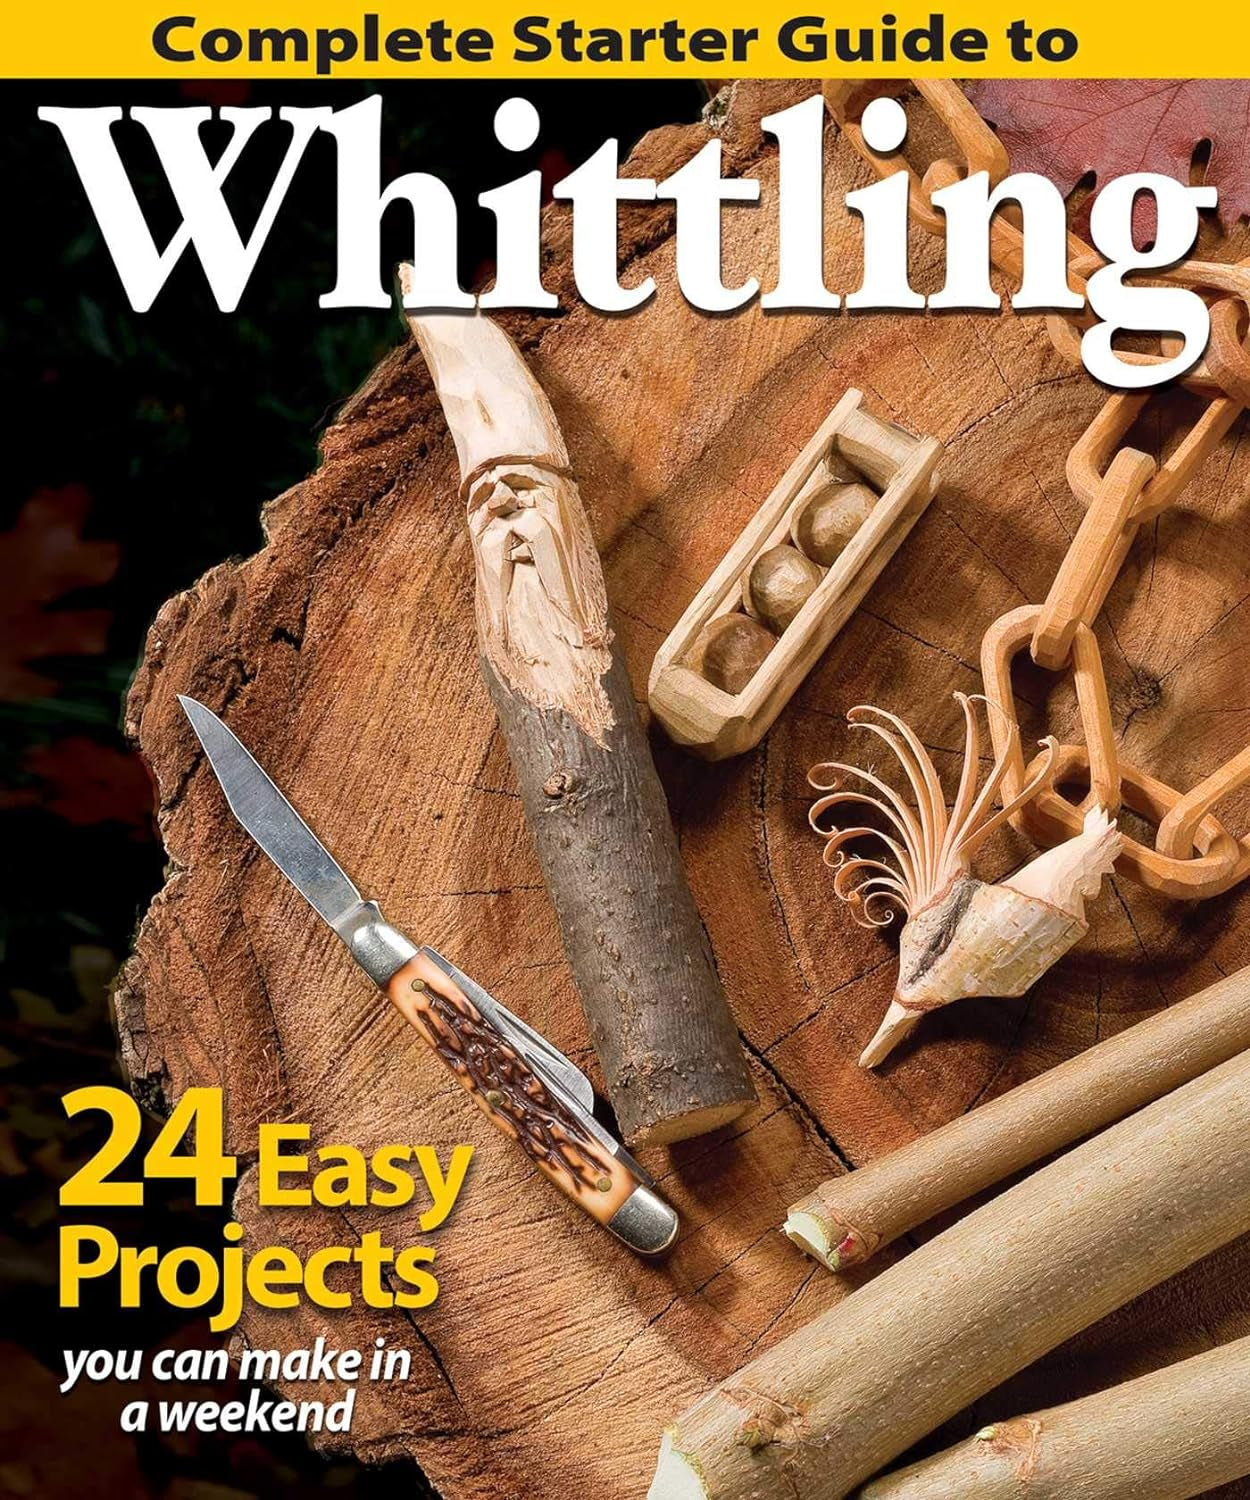 Complete Starter Guide to Whittling: 24 Easy Projects You Can Make in a Weekend (Fox Chapel Publishing) Beginner-Friendly Step-By-Step Instructions, Tips, and Ready-To-Carve Patterns for Toys & Gifts